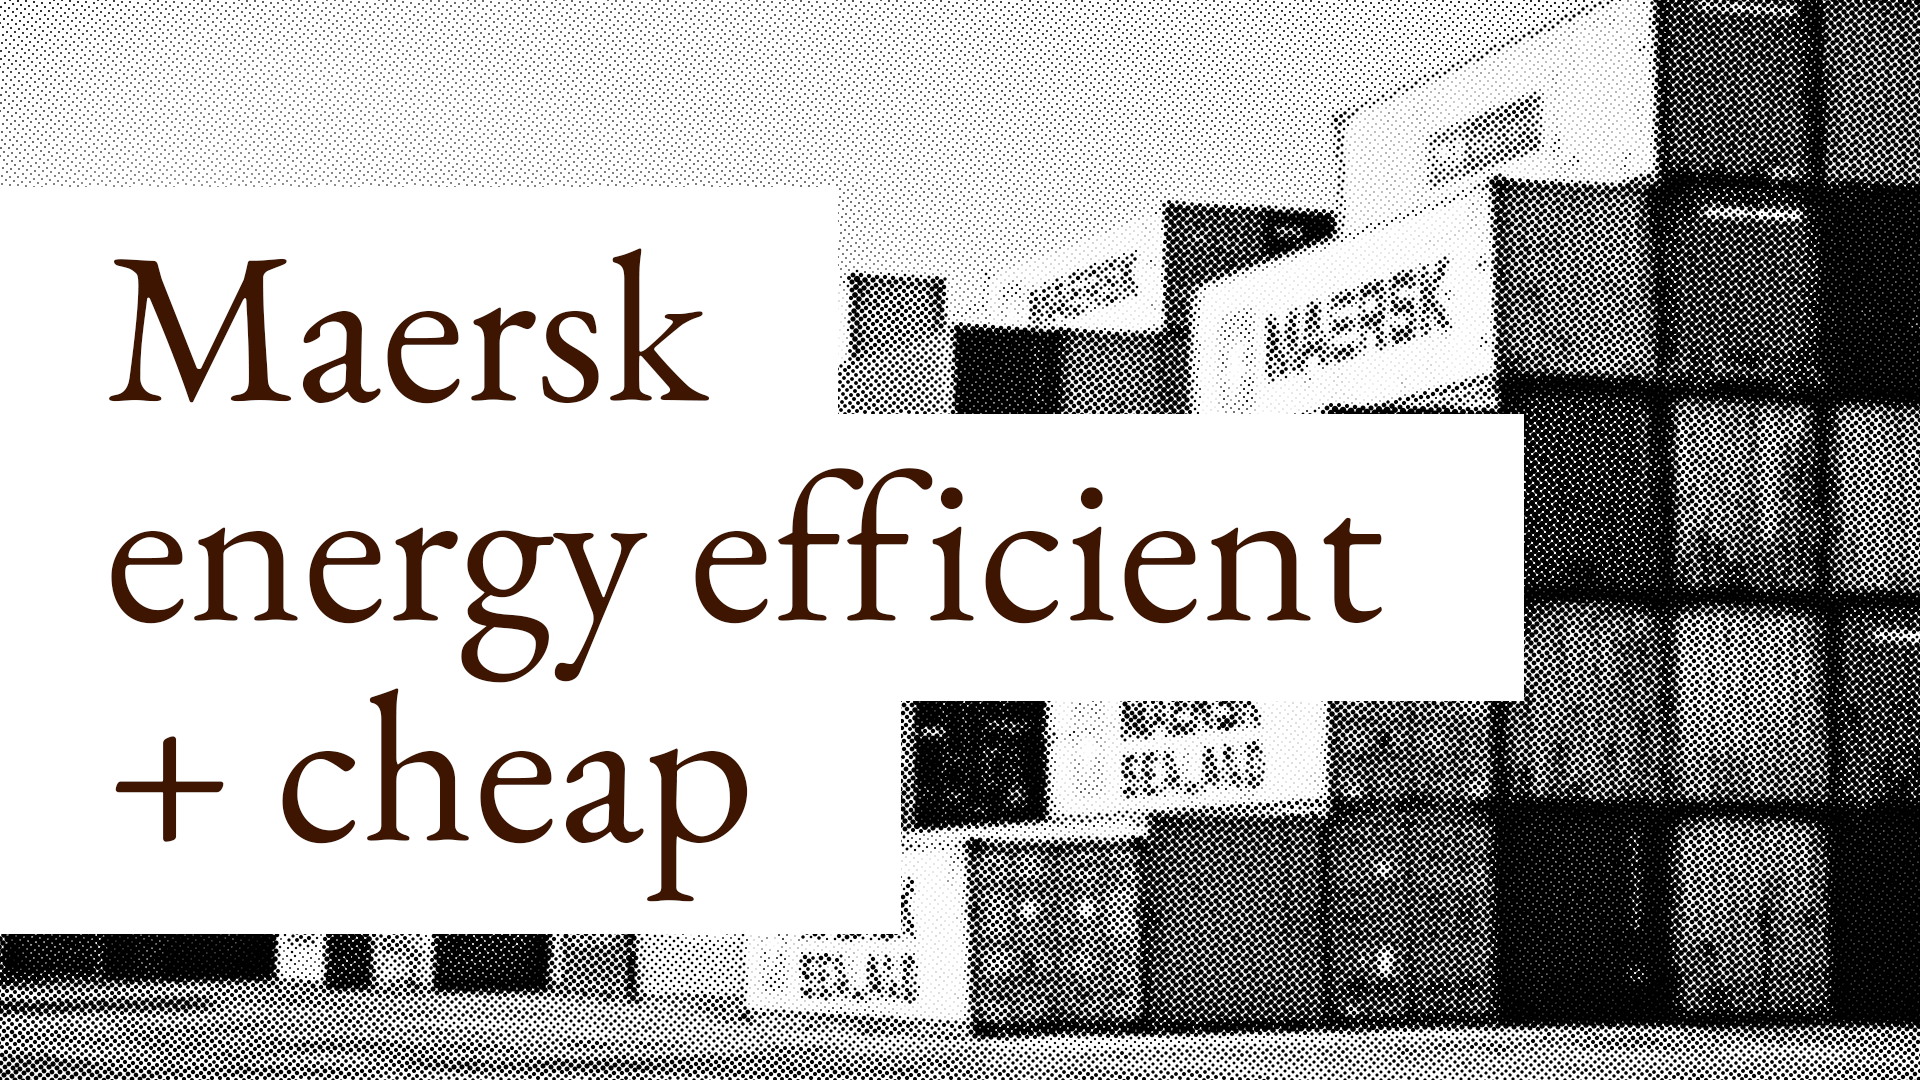 Maersk is energy efficient and the share just cheap with high dividend